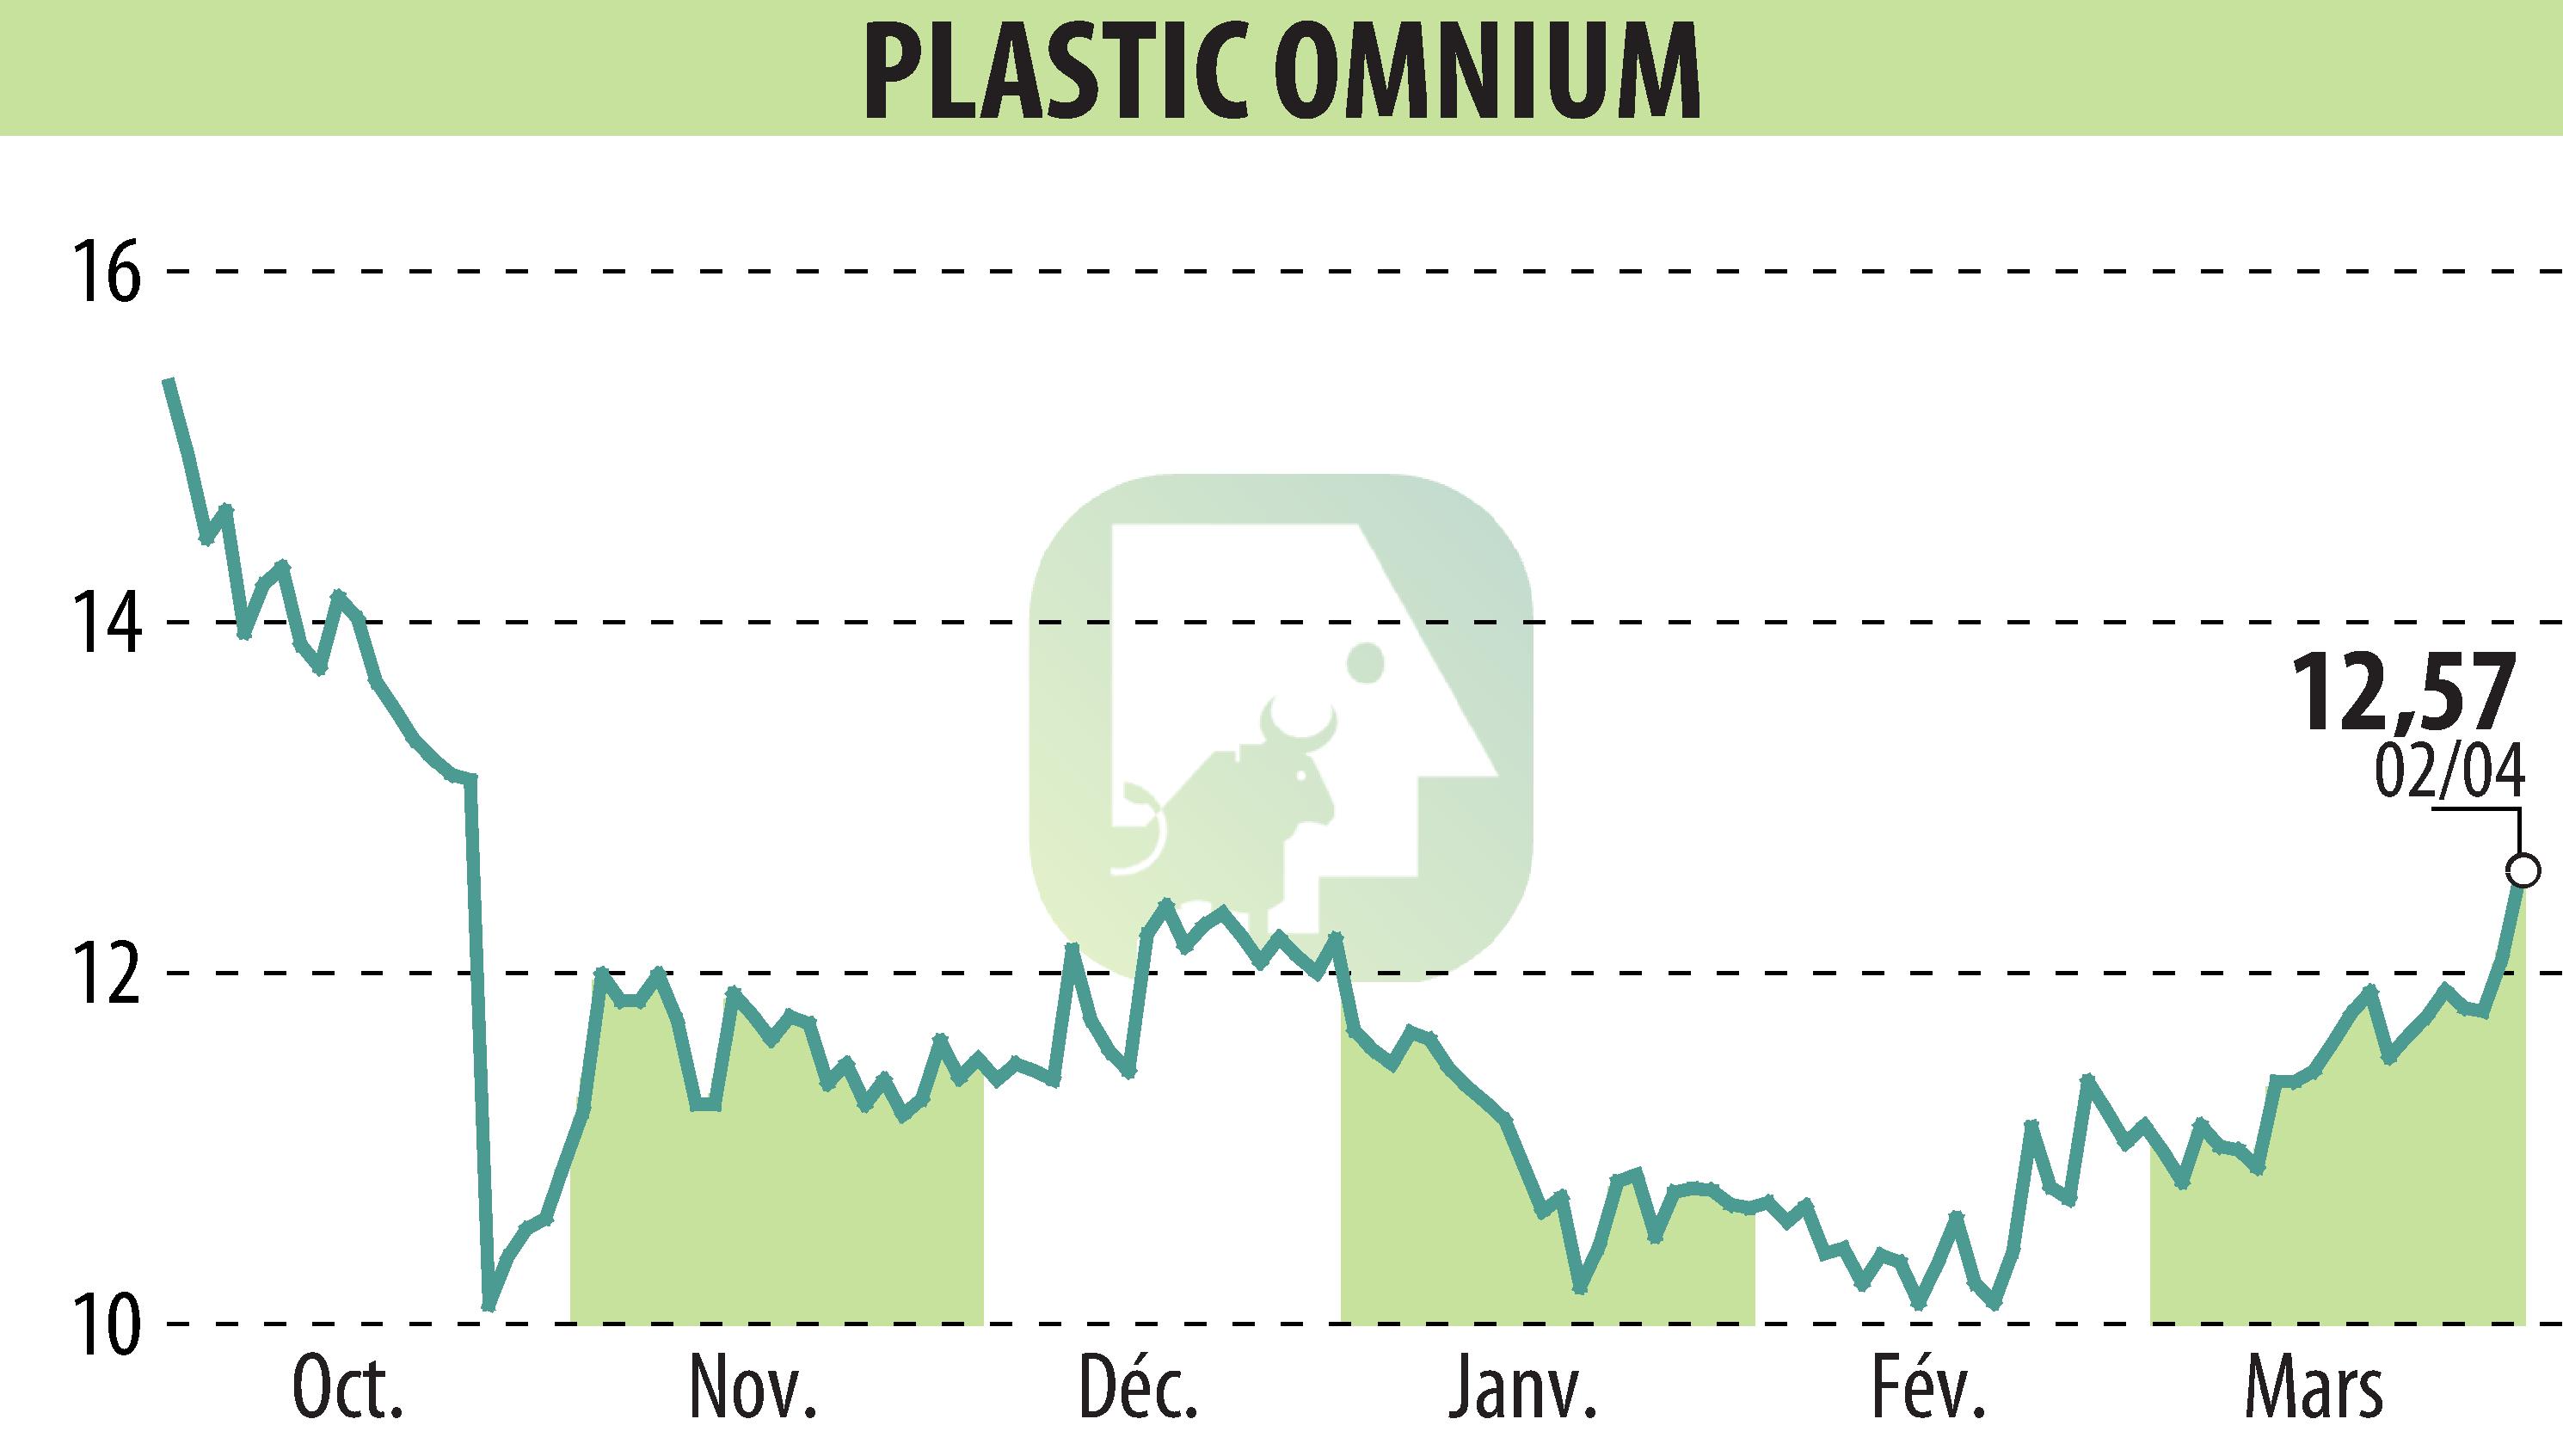 Stock price chart of PLASTIC OMNIUM (EPA:POM) showing fluctuations.